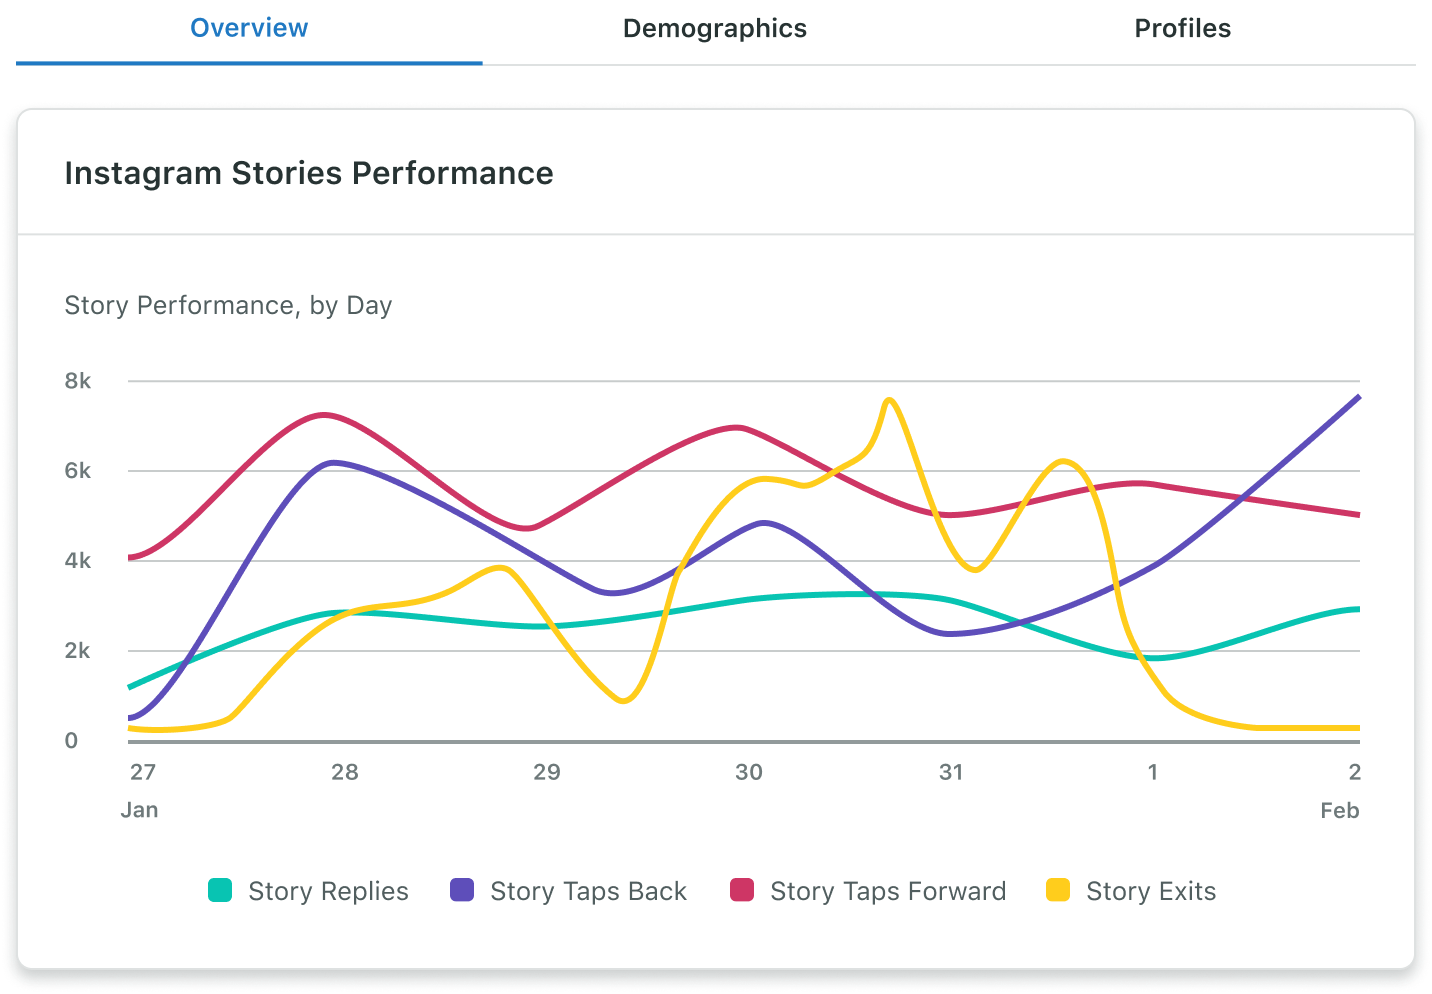 Sprout Social Instagram Stories Performance presented in a graph